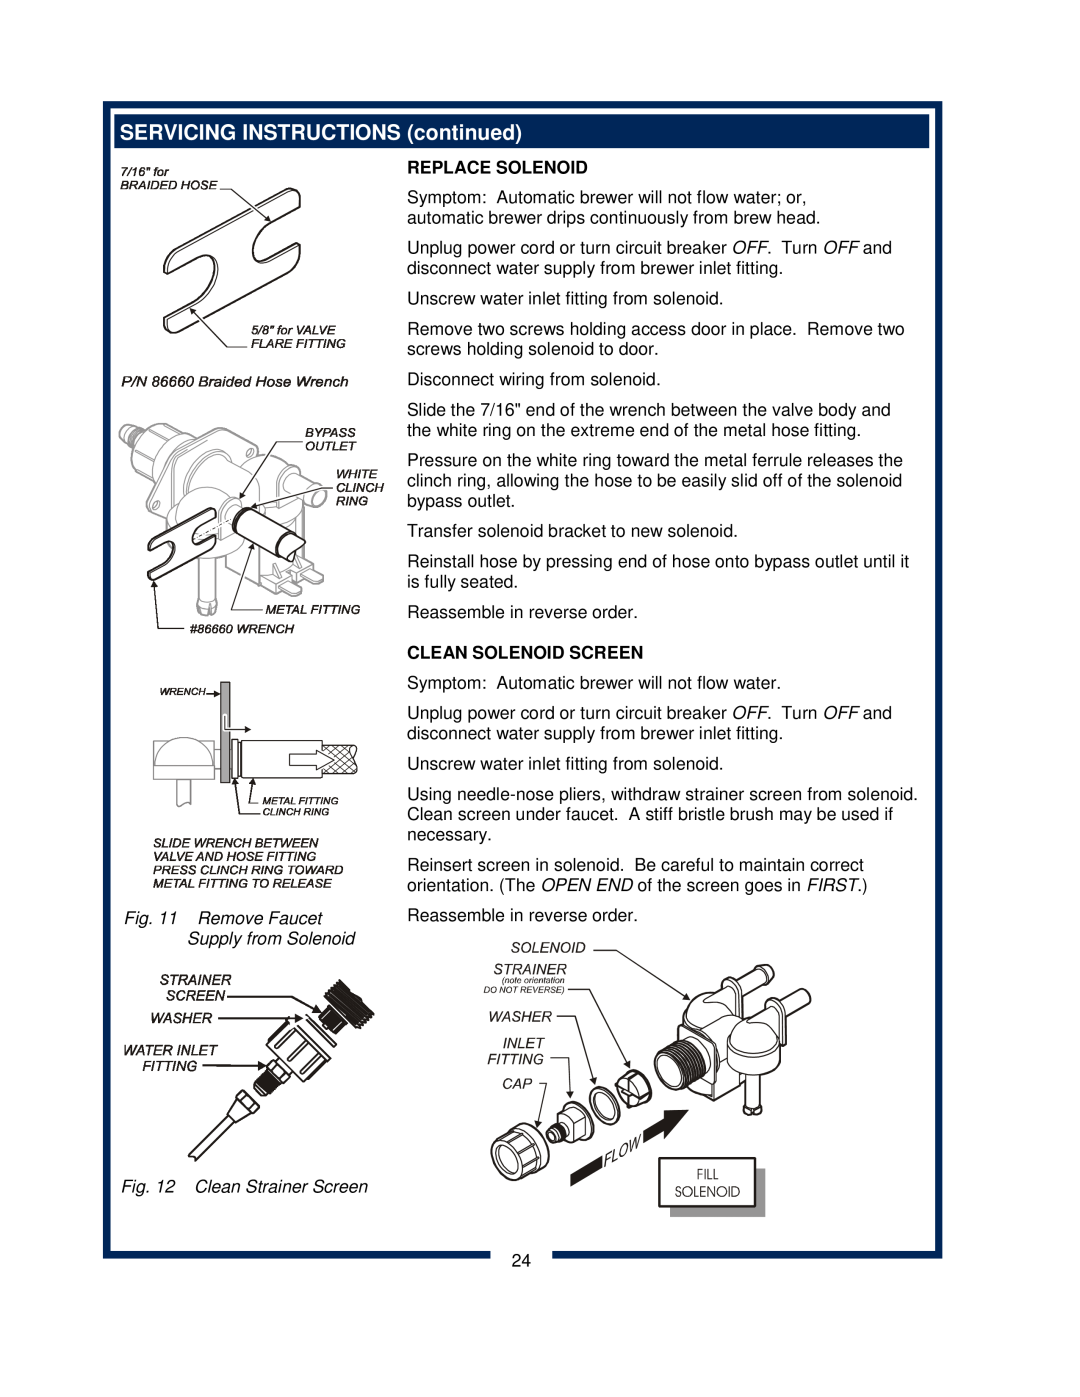 Bloomfield 600 manual SERVICING INSTRUCTIONS continued, Remove Faucet Supply from Solenoid, Clean Strainer Screen 